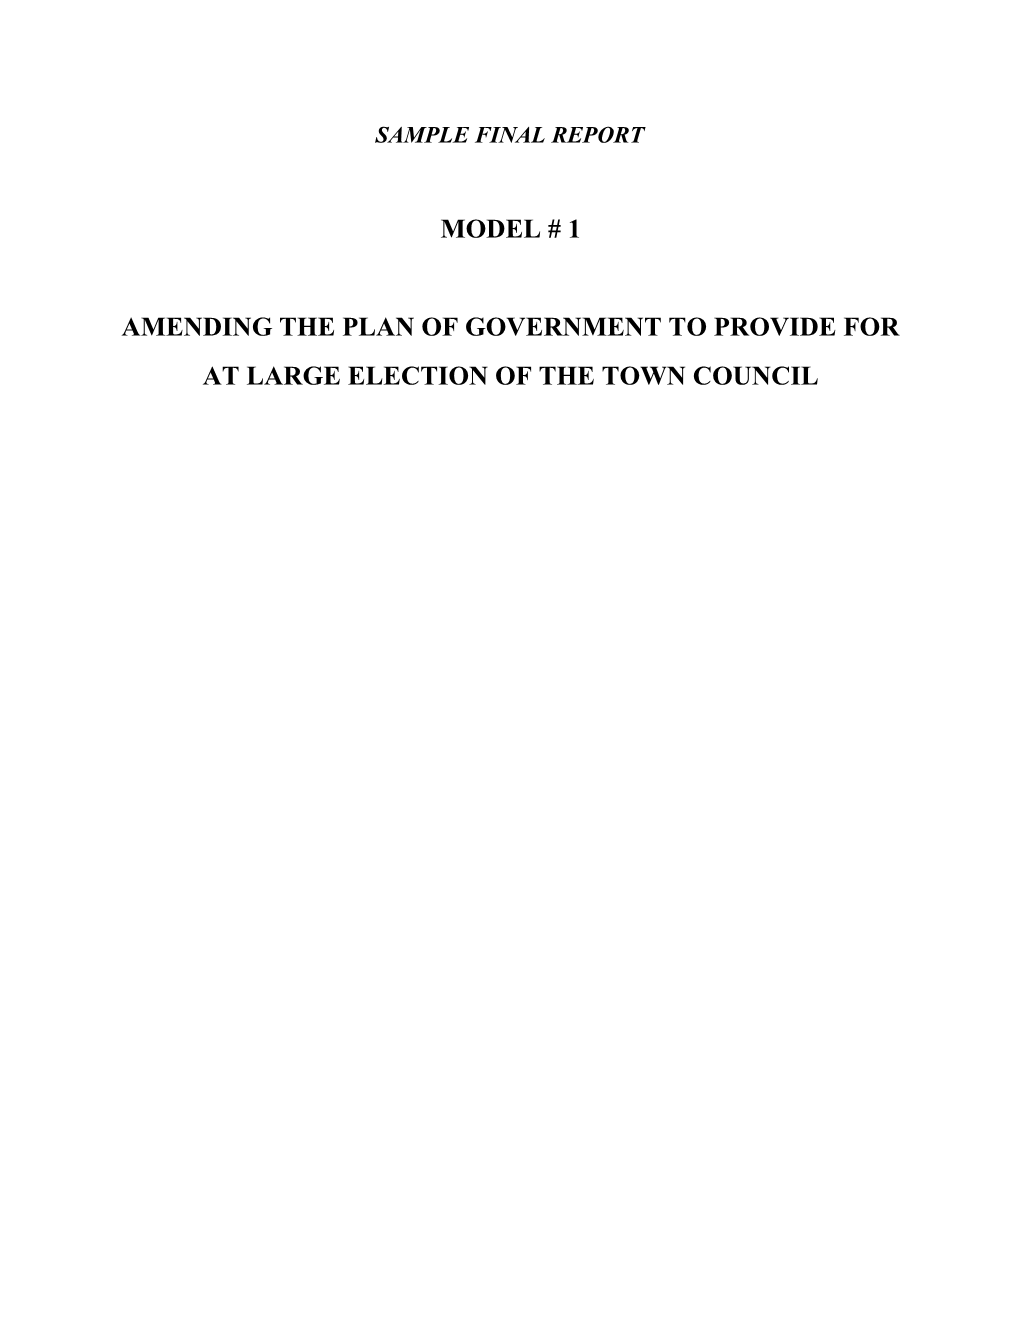 Amending the Plan of Government to Provide For